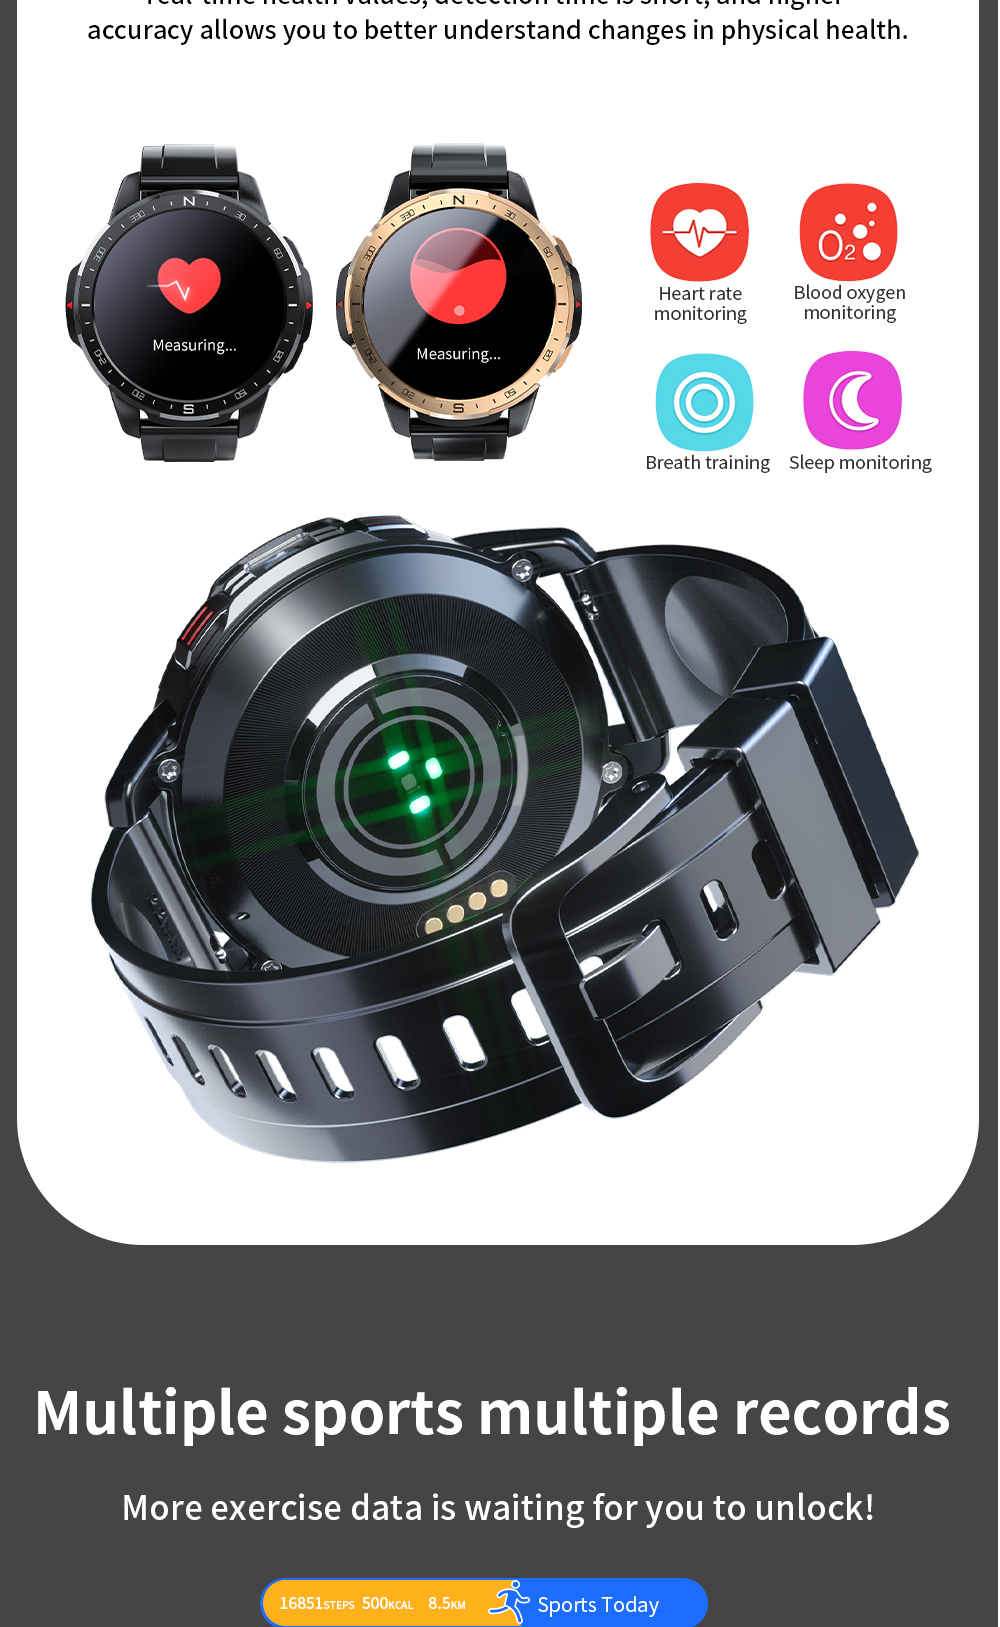 [Dual Mode Dual Chip]LOKMAT APPLLP 7 1.6 inch 400*400px Screen Octa-core 2G+16G Android Smartwatch SIM Card WiFi GPS Positioning 4G LTE Smart Watch Phone